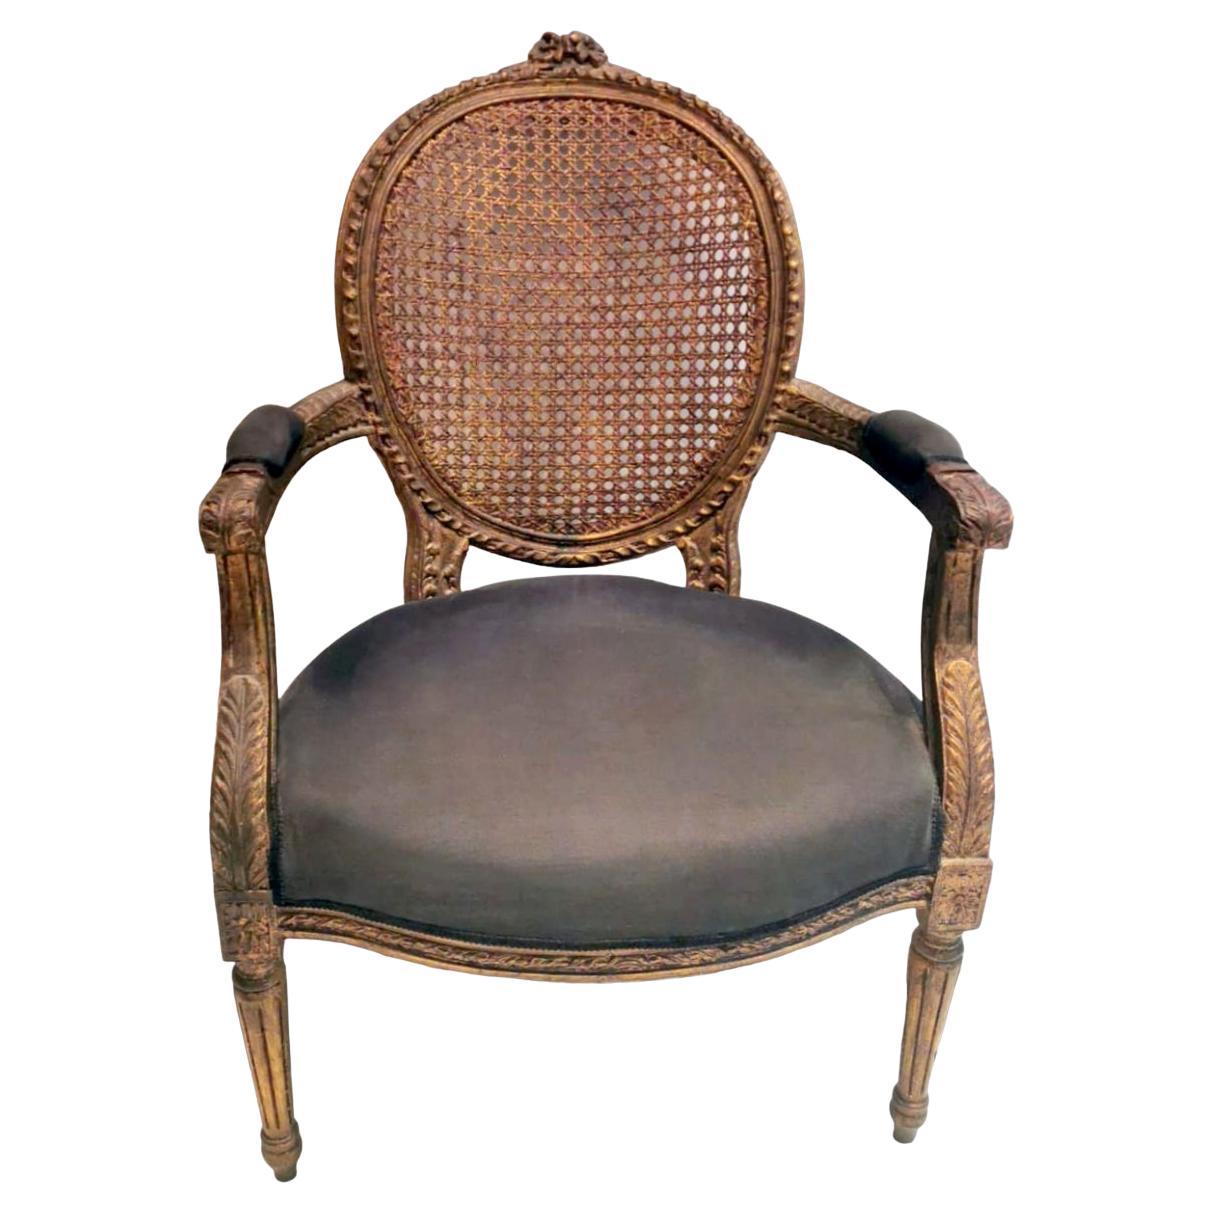 Louis XVI Style French Chair With Arms And Back In Vienna Straw